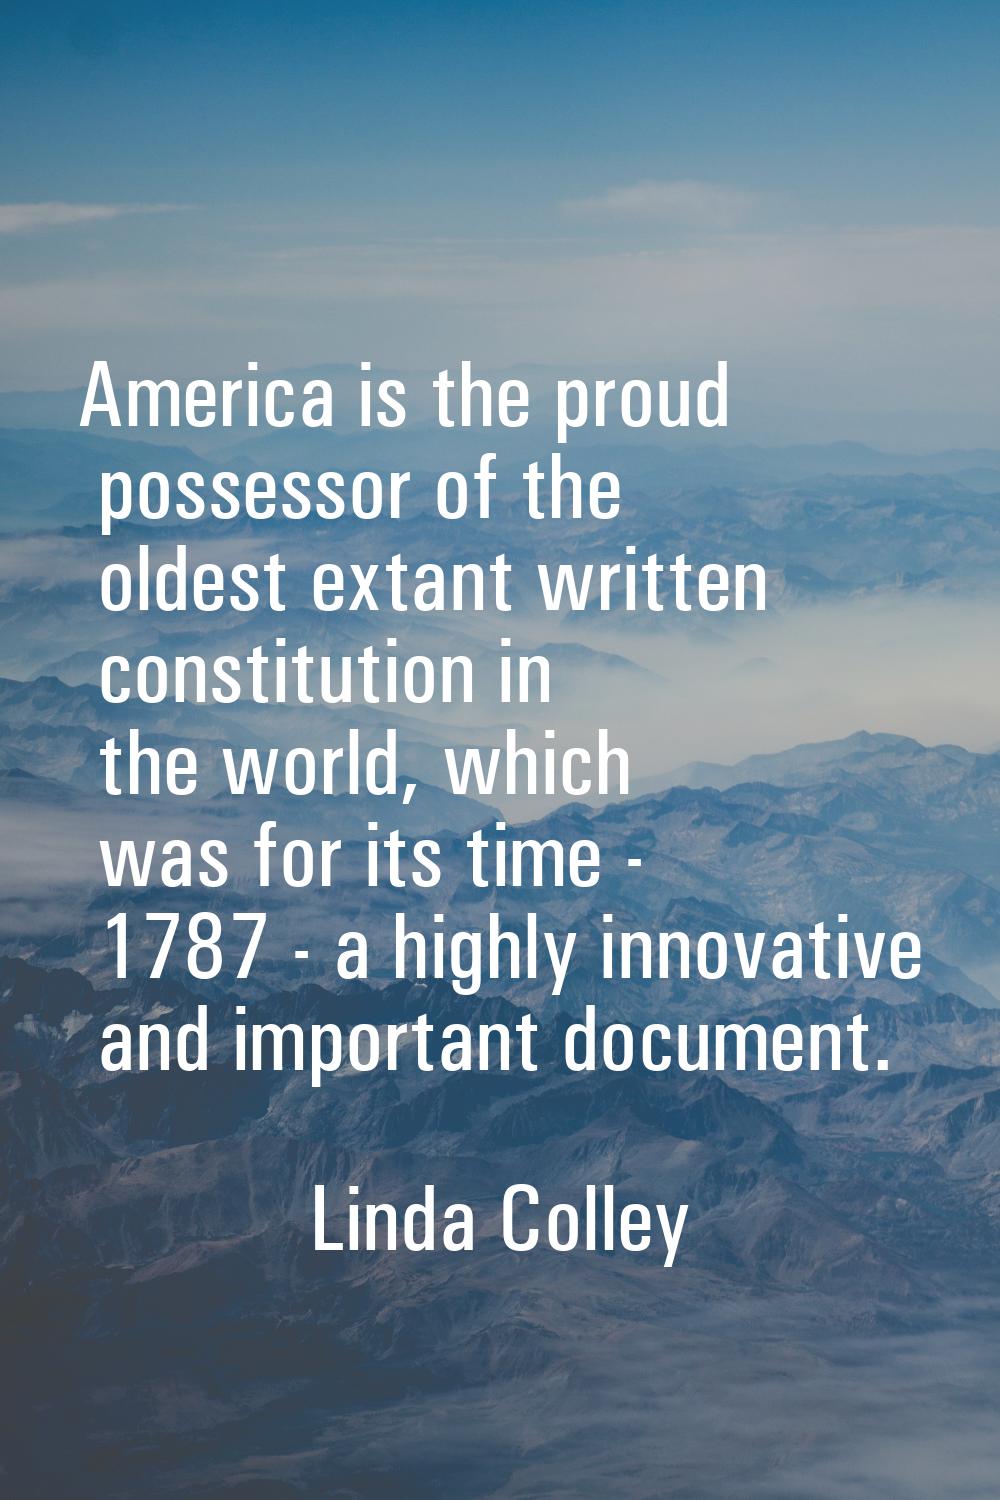 America is the proud possessor of the oldest extant written constitution in the world, which was fo